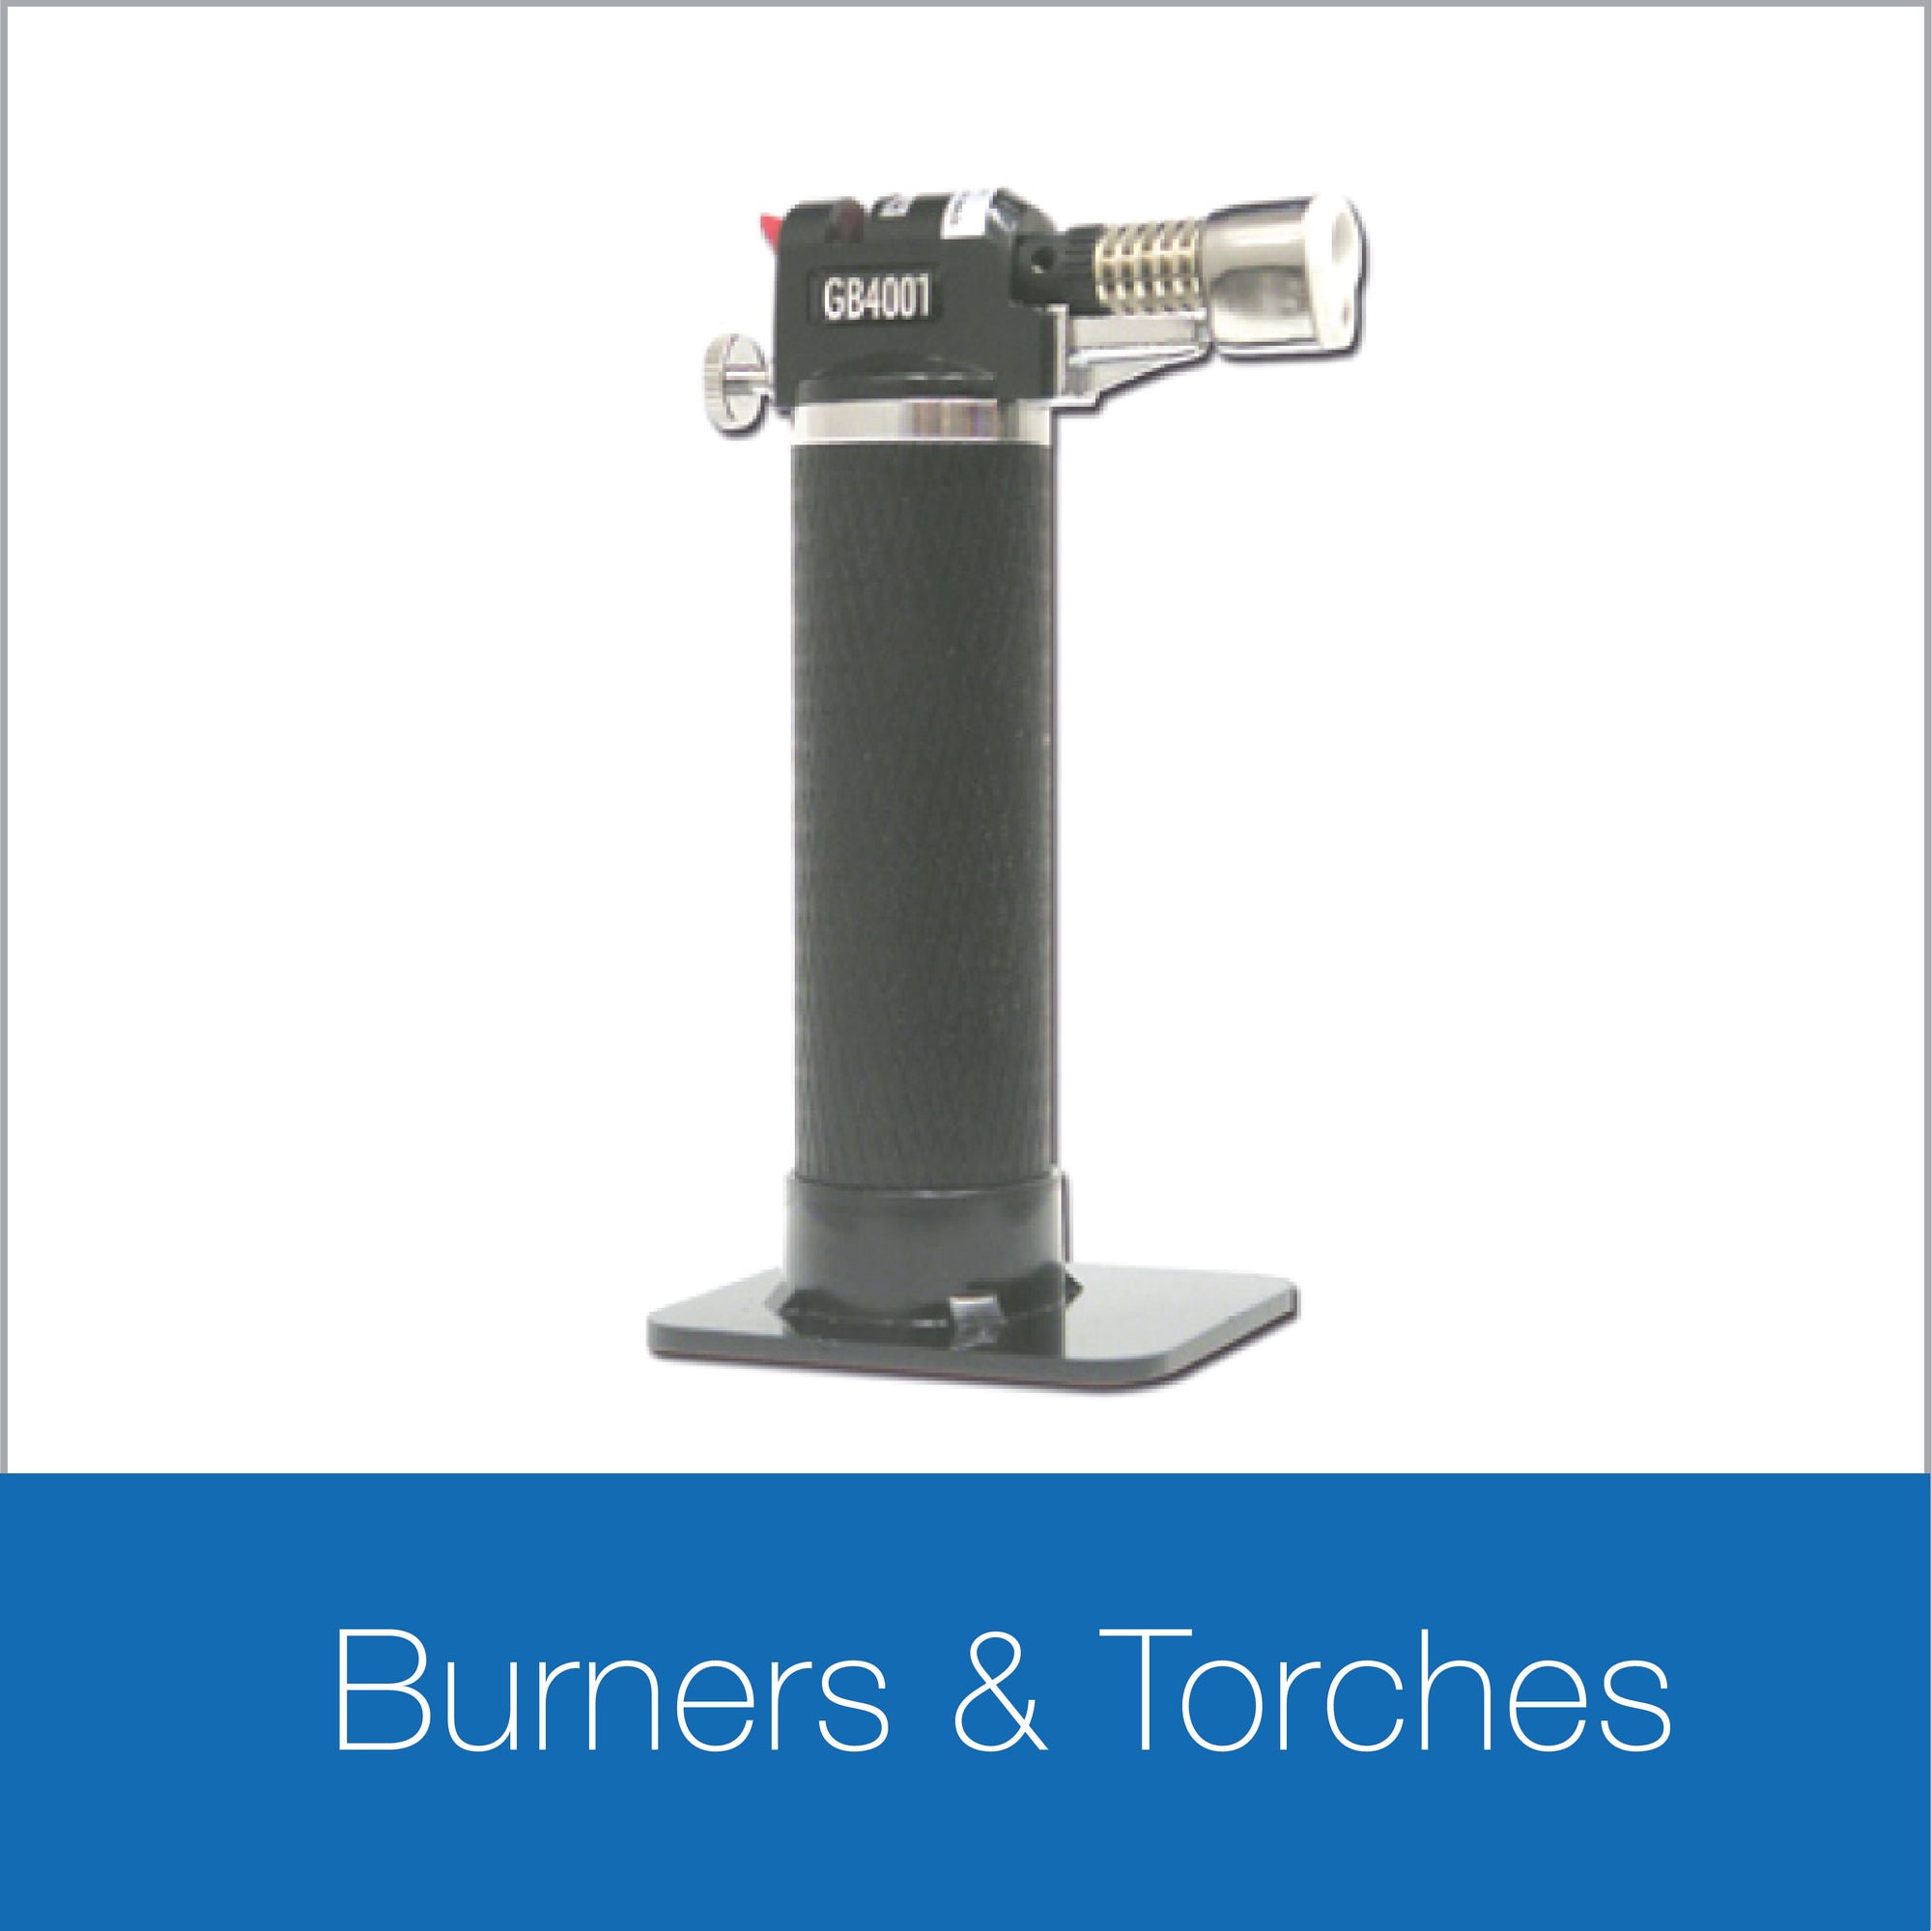 Burners & Torches